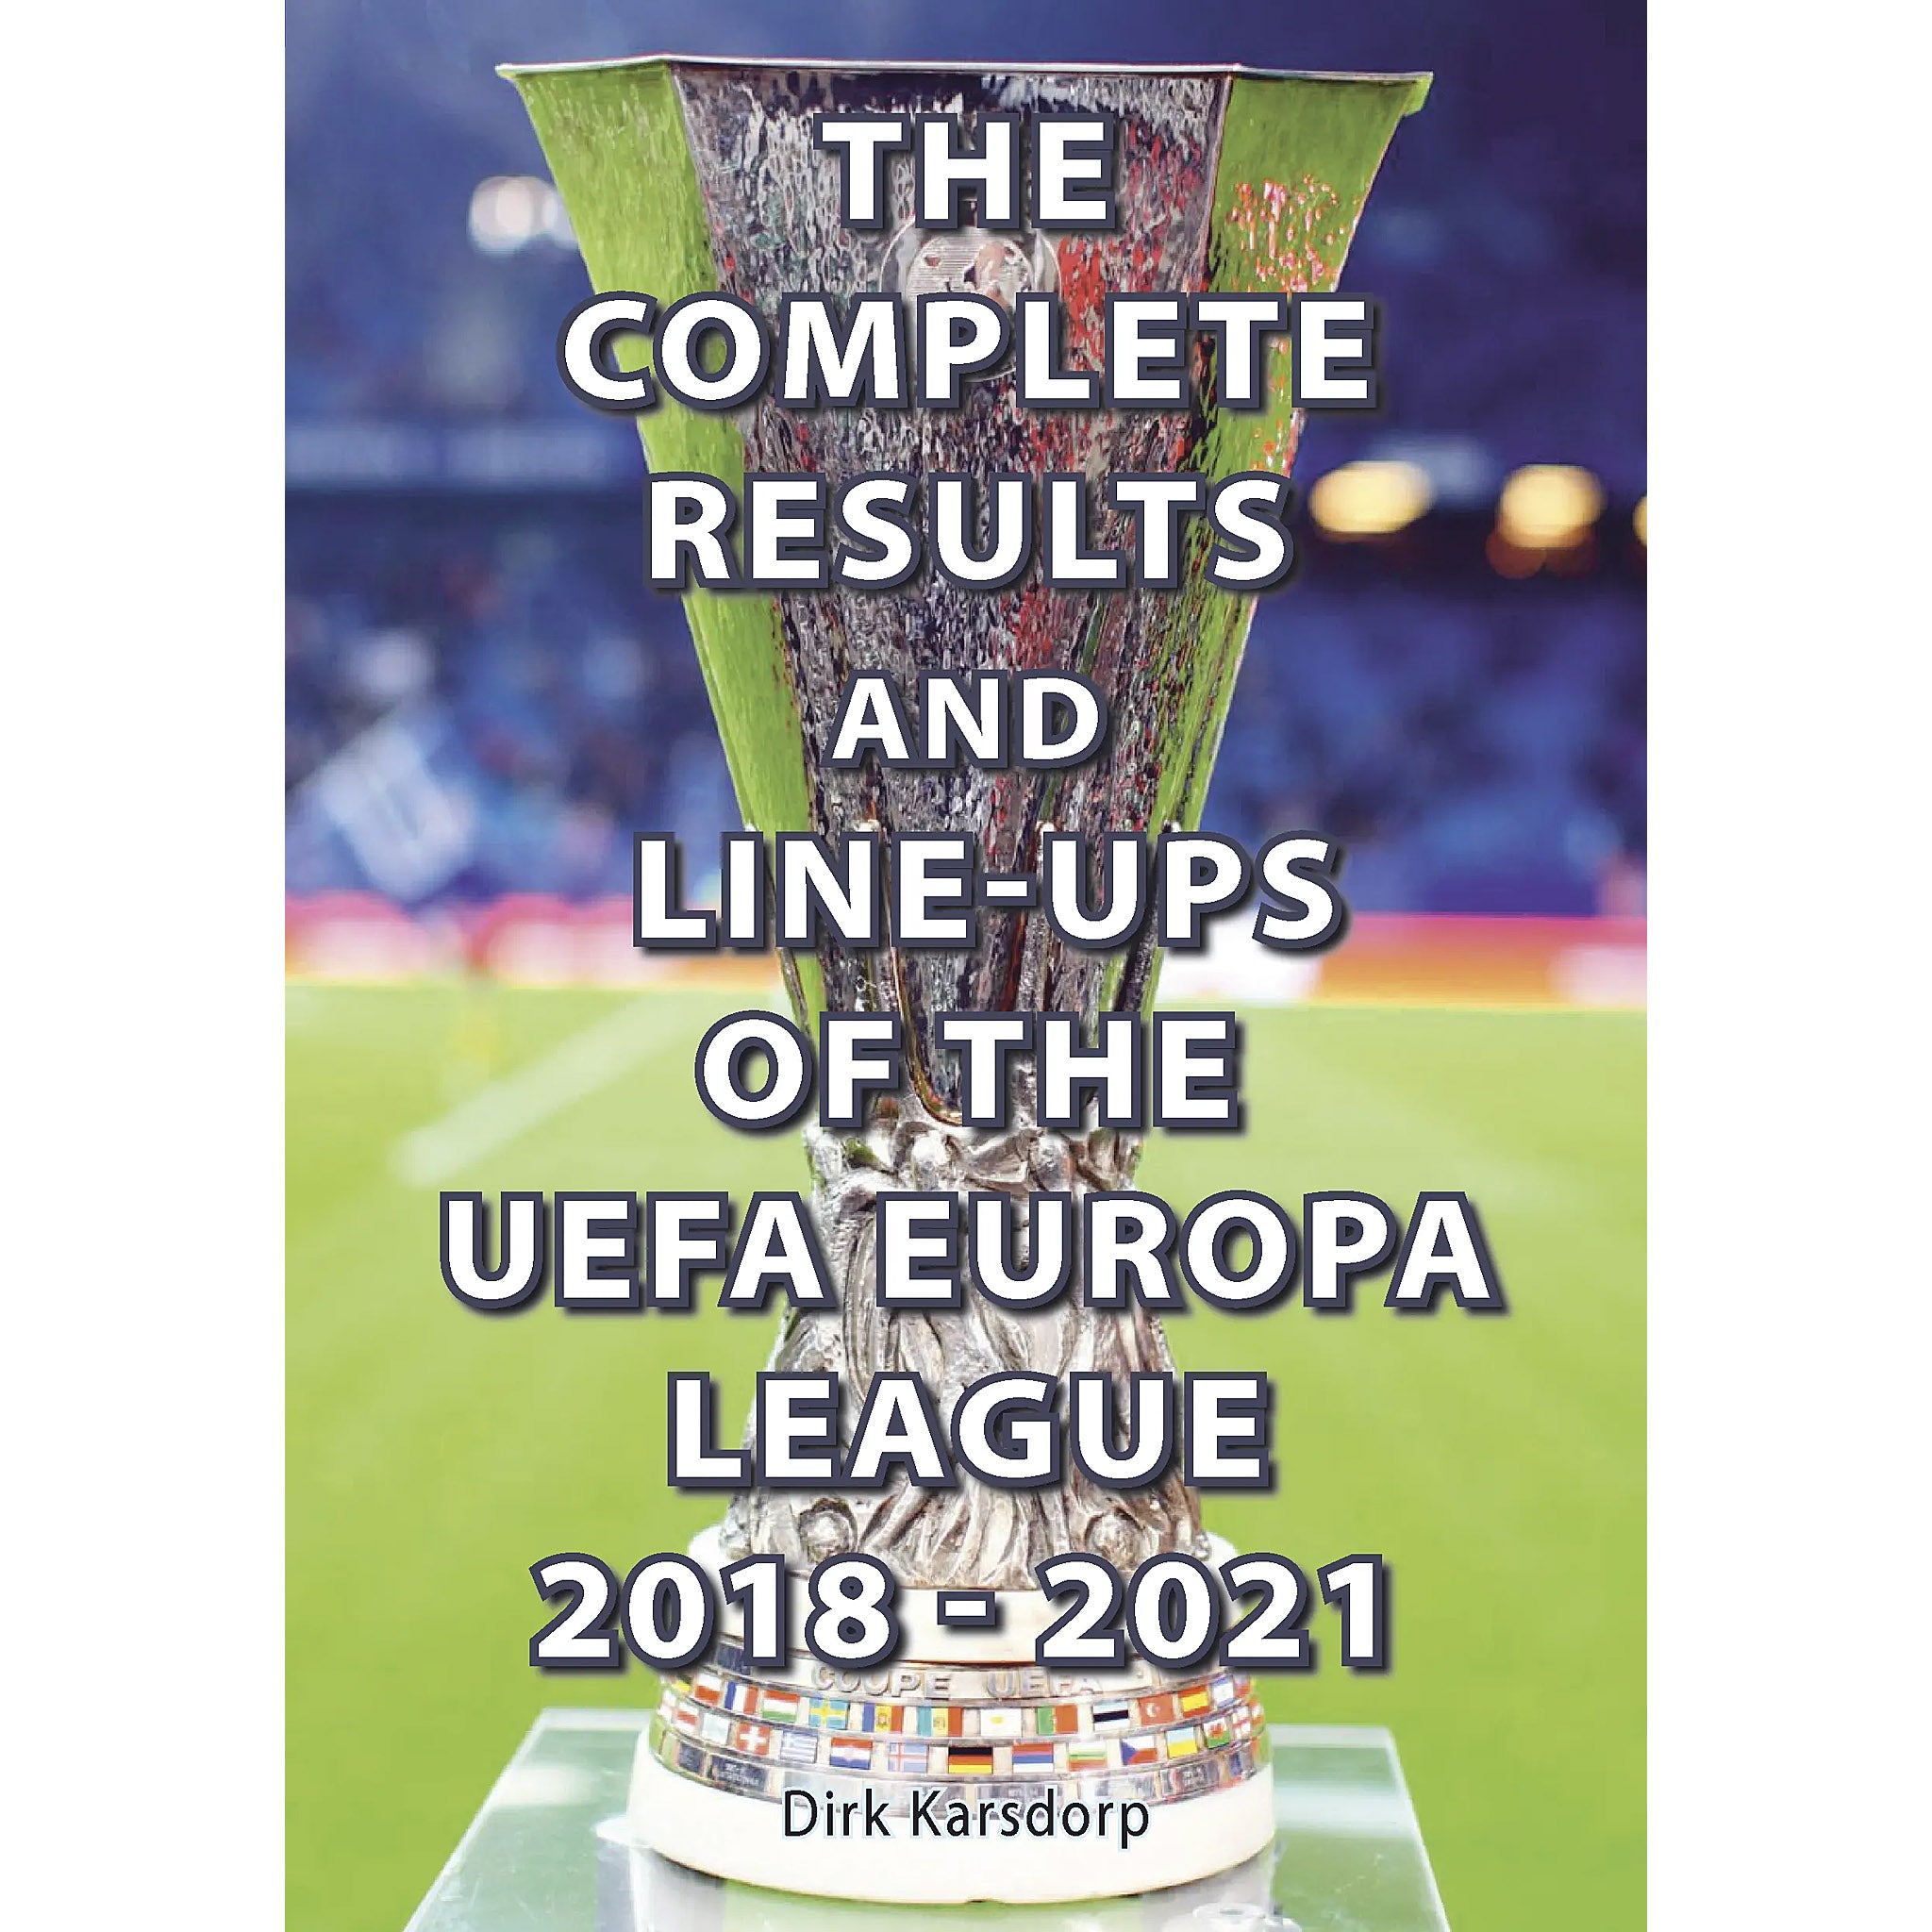 The Complete Results and Line-ups of the UEFA Europa League 2018-2021